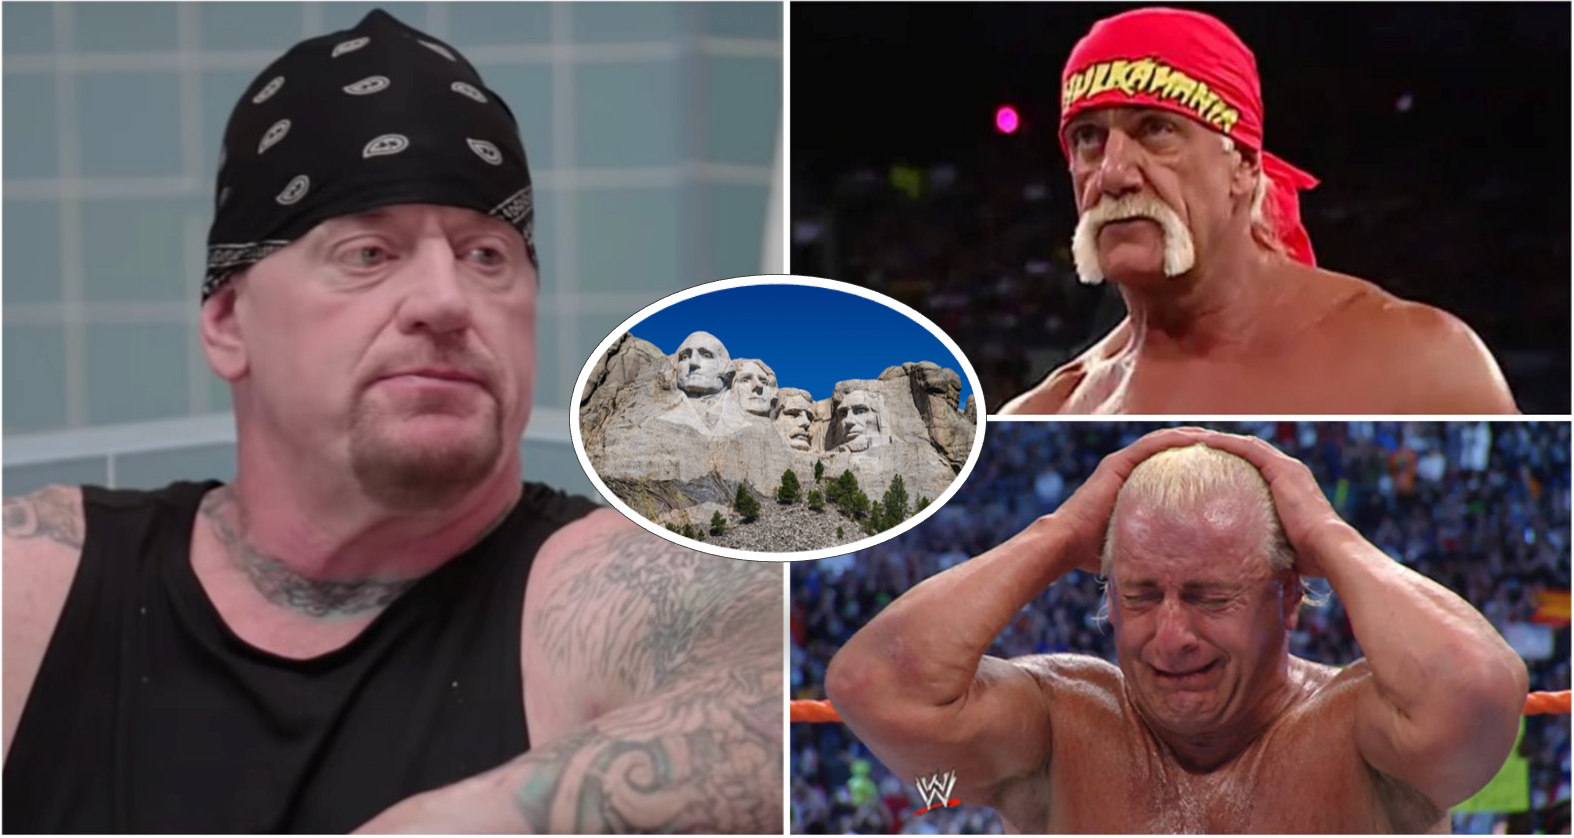 The Undertaker's WWE Mount Rushmore doesn't have Ric Flair or Hulk Hogan